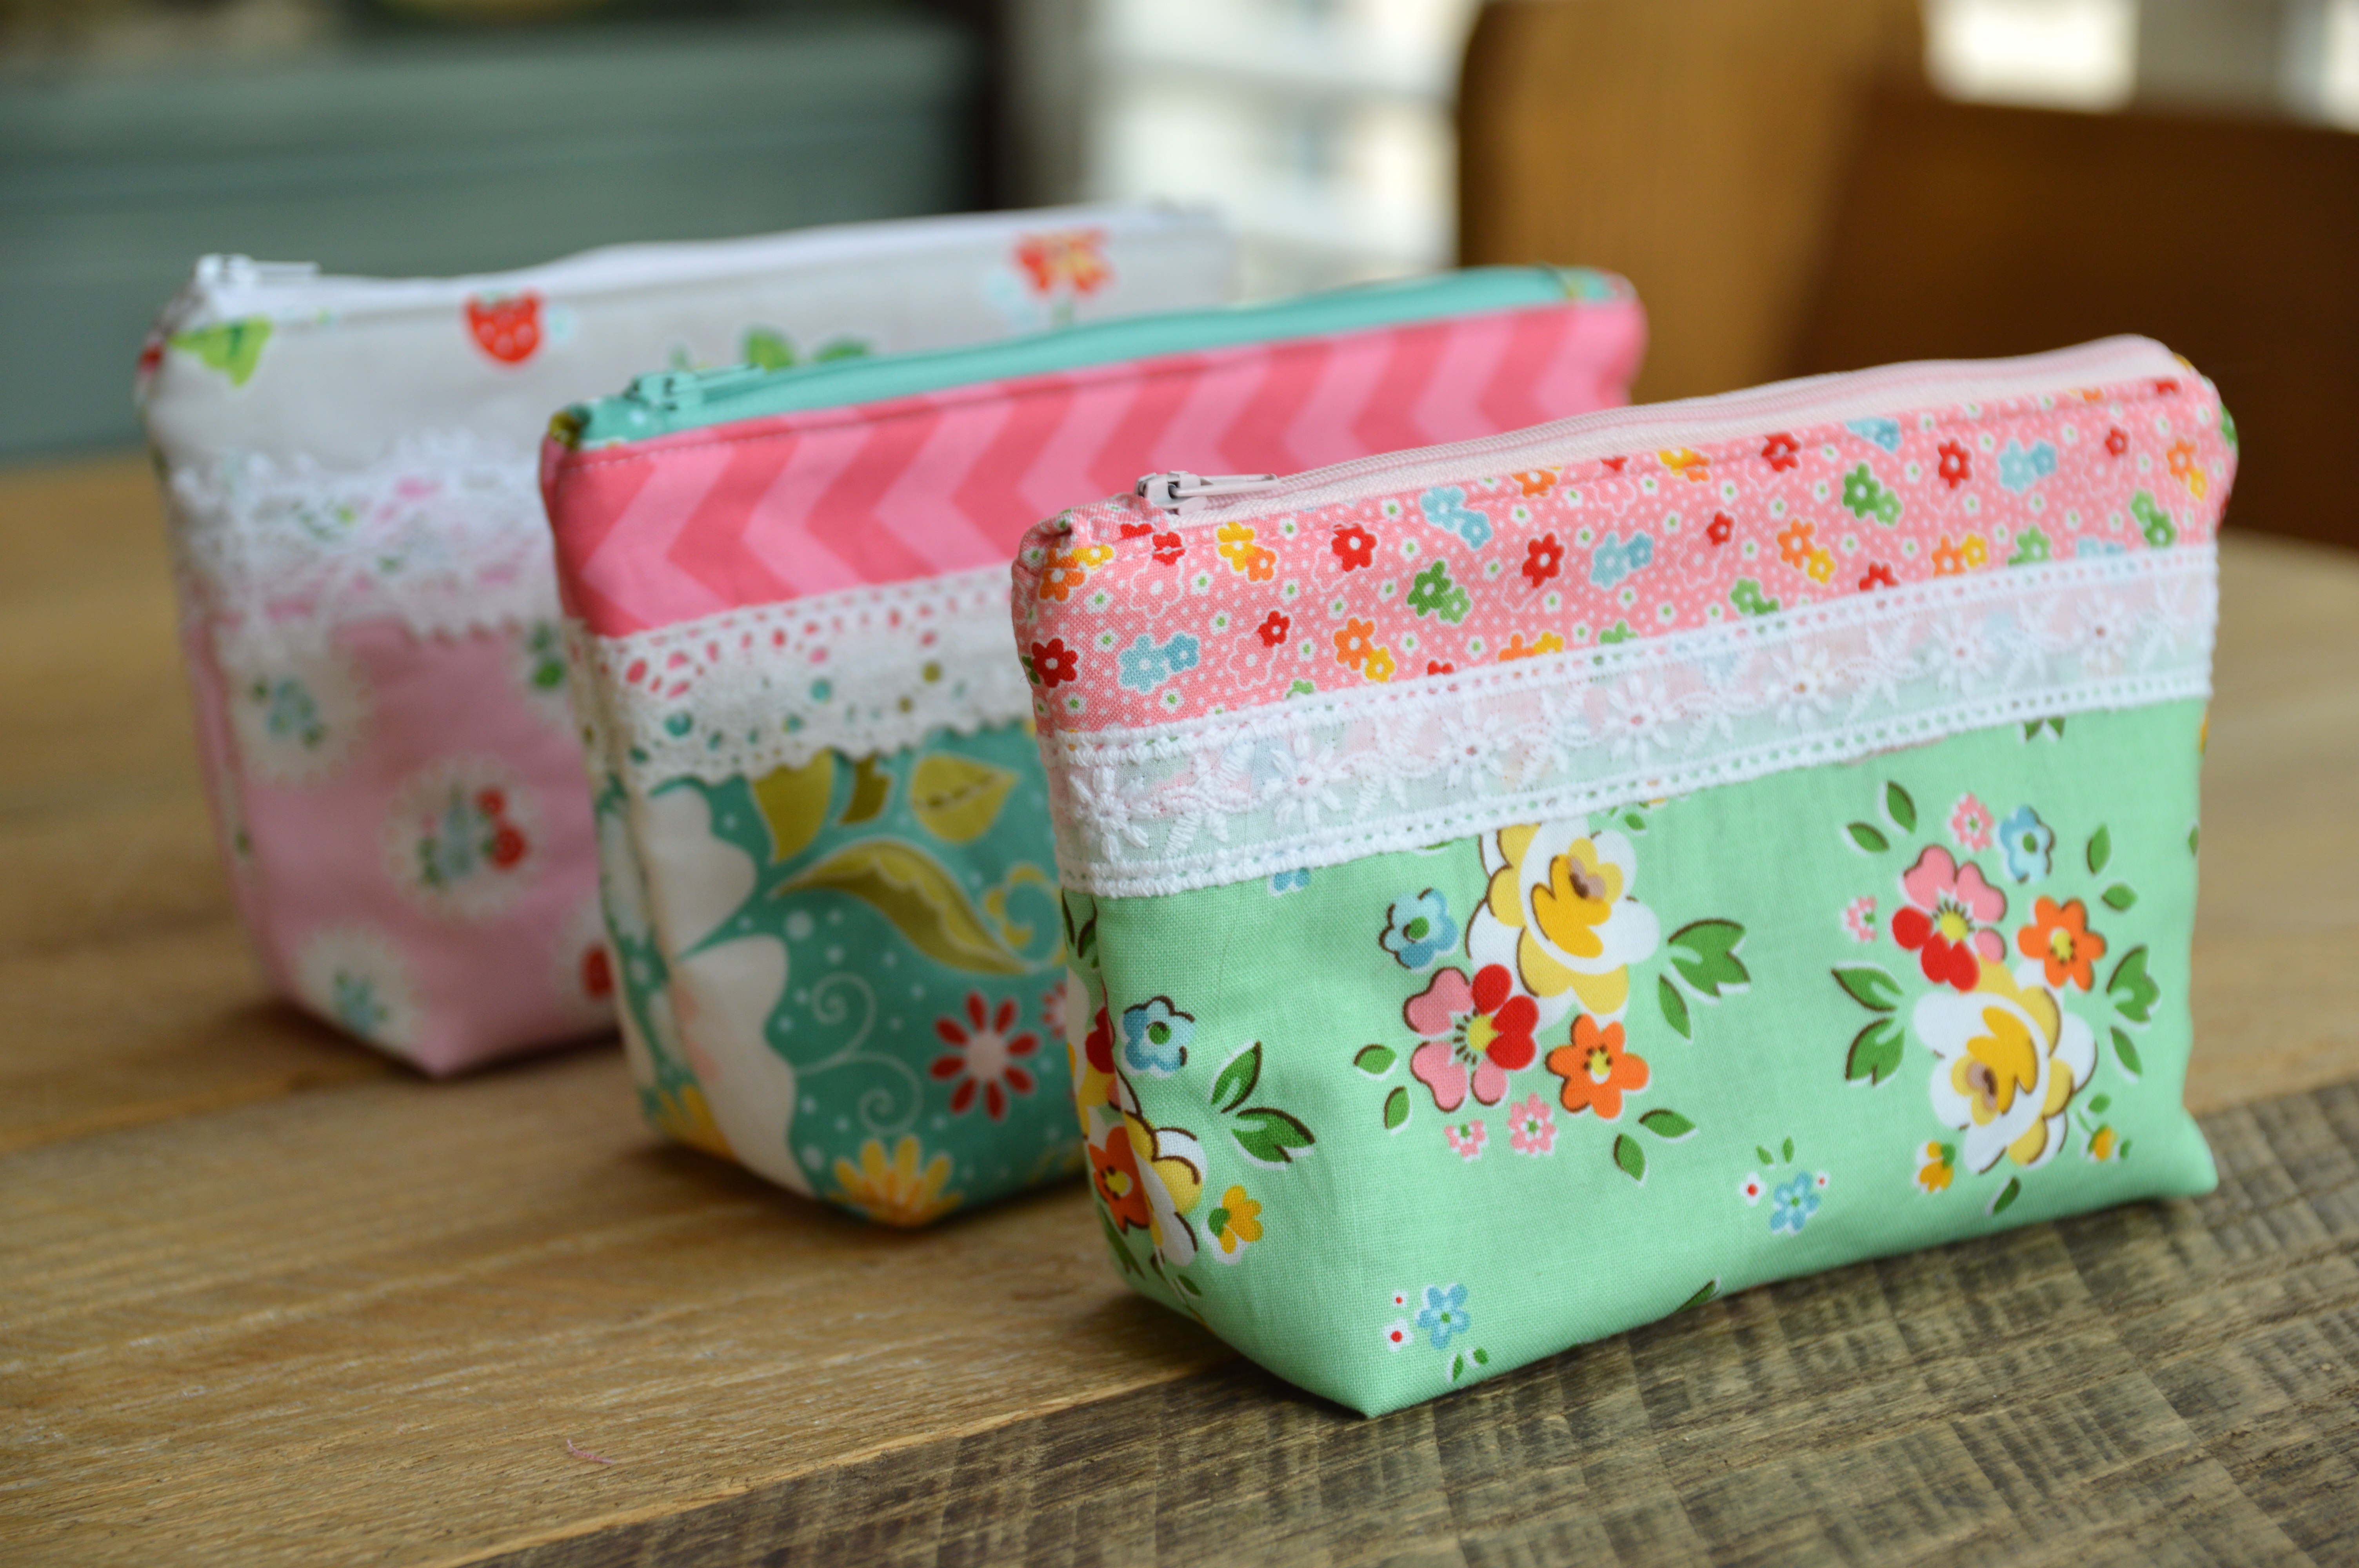 Easy Zipper Pouch Tutorial, The Perfect Gift